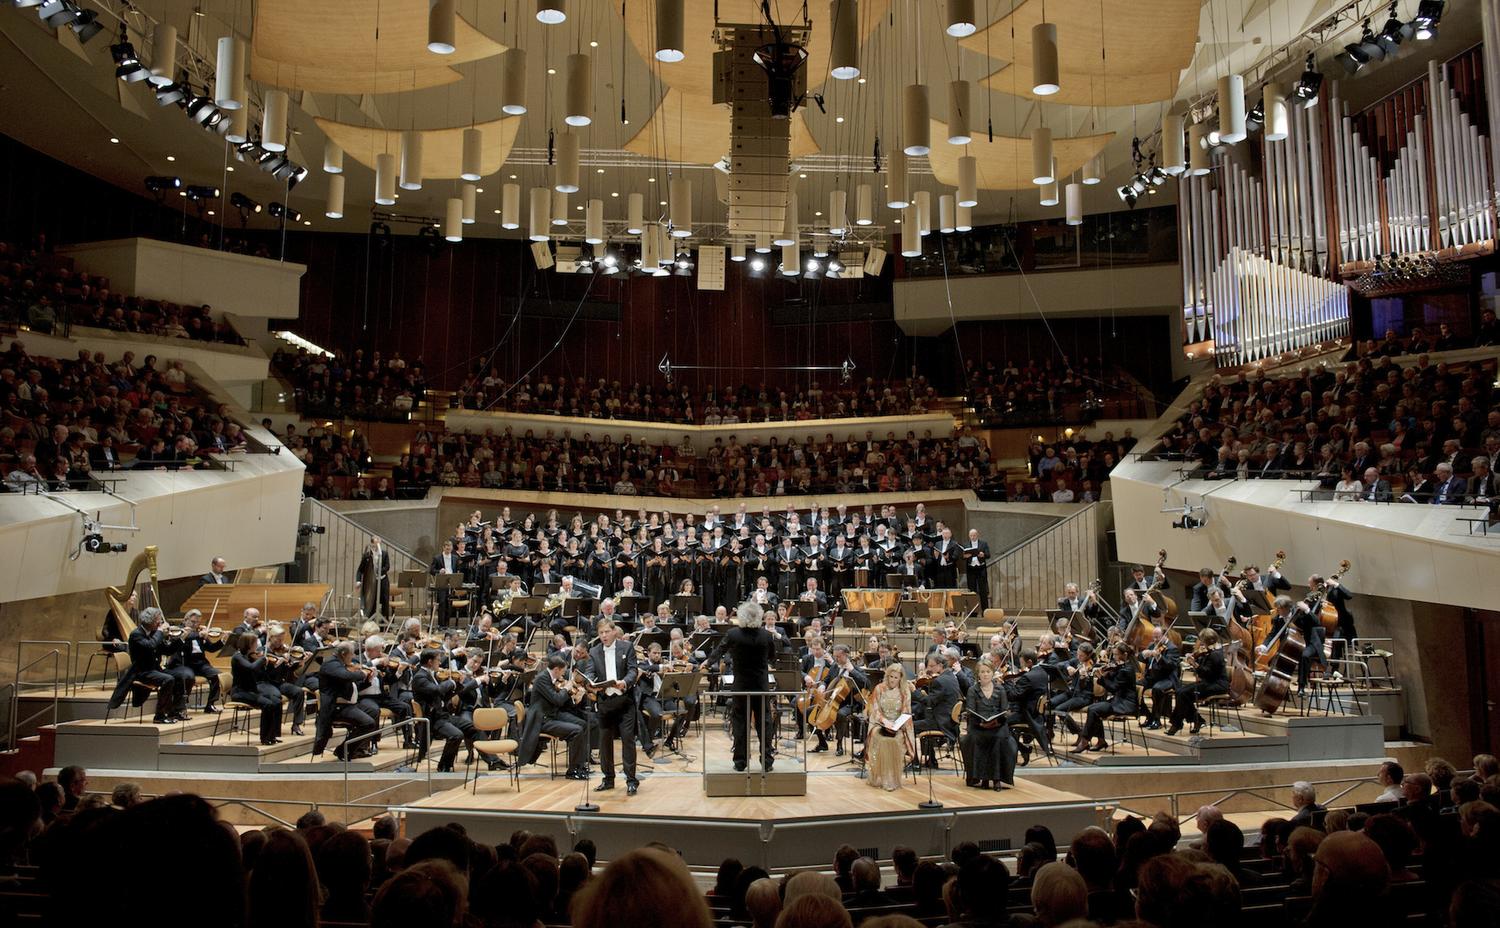 Rattle Conducts Bach's St. John Passion | The Berlin Philharmonic in Concert | WQXR